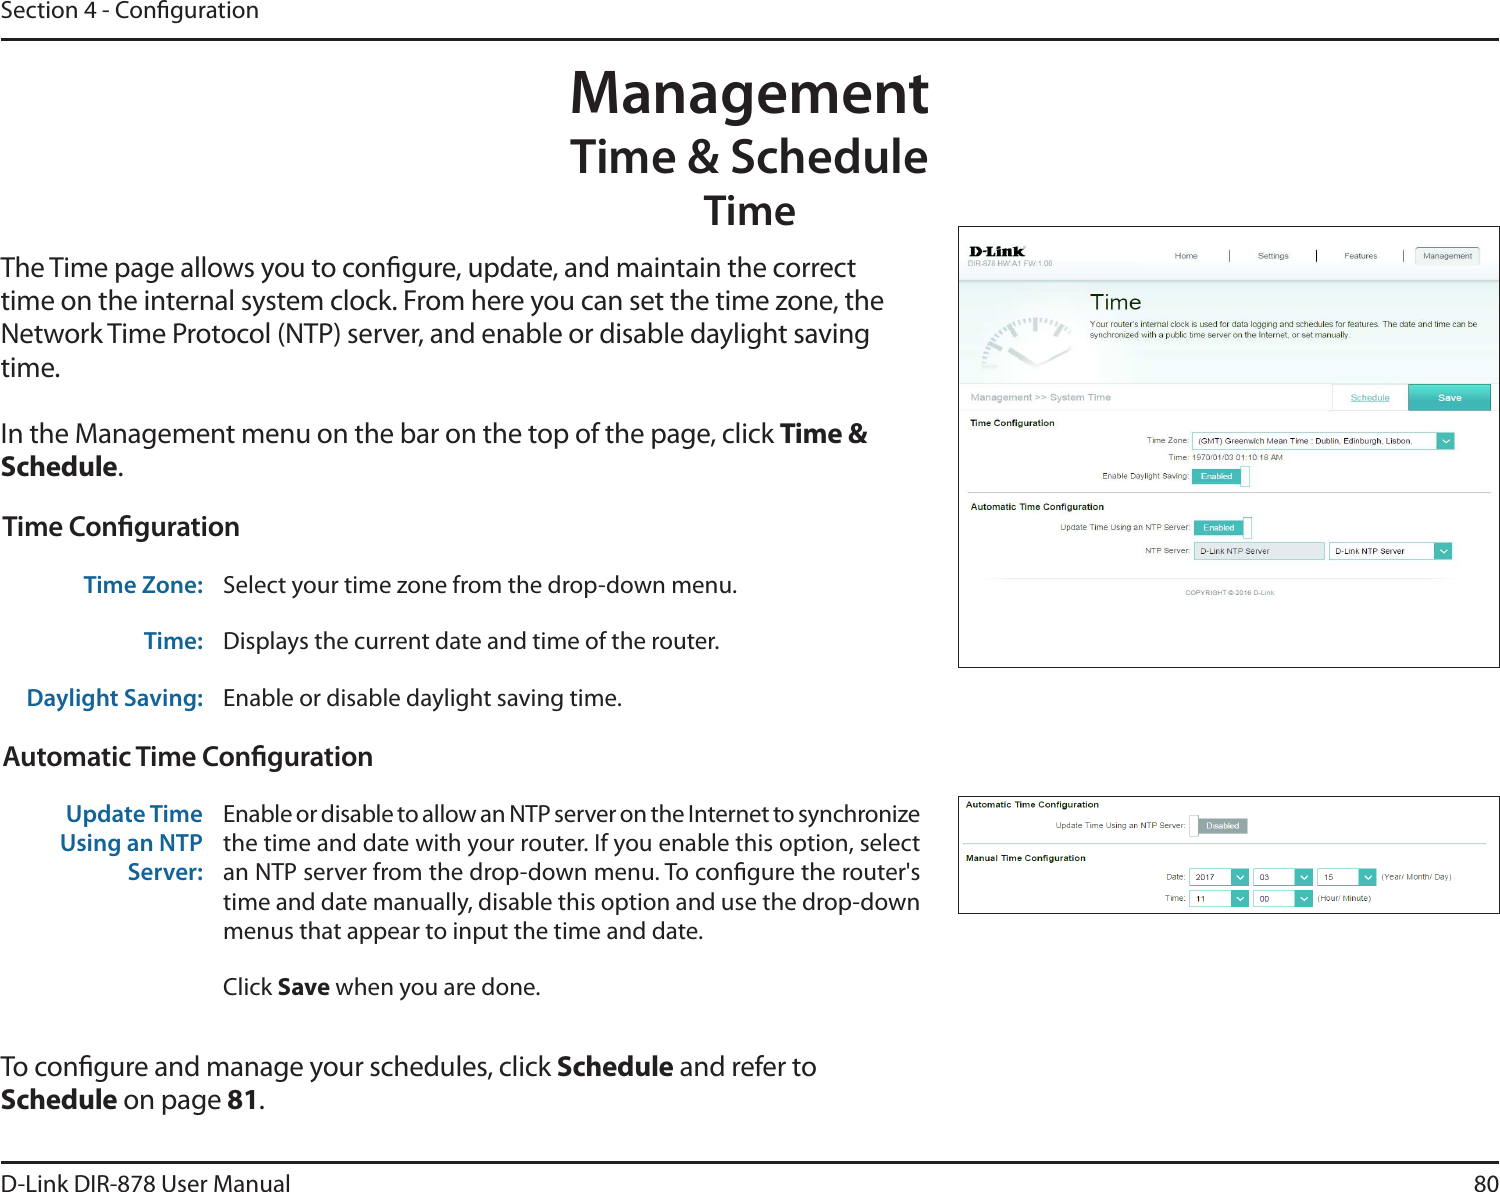 80D-Link DIR-878 User ManualSection 4 - CongurationManagementTime &amp; ScheduleTimeThe Time page allows you to congure, update, and maintain the correct time on the internal system clock. From here you can set the time zone, the Network Time Protocol (NTP) server, and enable or disable daylight saving time.In the Management menu on the bar on the top of the page, click Time &amp; Schedule.To congure and manage your schedules, click Schedule and refer to Schedule on page 81.Time CongurationTime Zone: Select your time zone from the drop-down menu.Time: Displays the current date and time of the router.Daylight Saving: Enable or disable daylight saving time.Automatic Time CongurationUpdate Time Using an NTP Server:Enable or disable to allow an NTP server on the Internet to synchronize the time and date with your router. If you enable this option, select an NTP server from the drop-down menu. To congure the router&apos;s time and date manually, disable this option and use the drop-down menus that appear to input the time and date.Click Save when you are done.